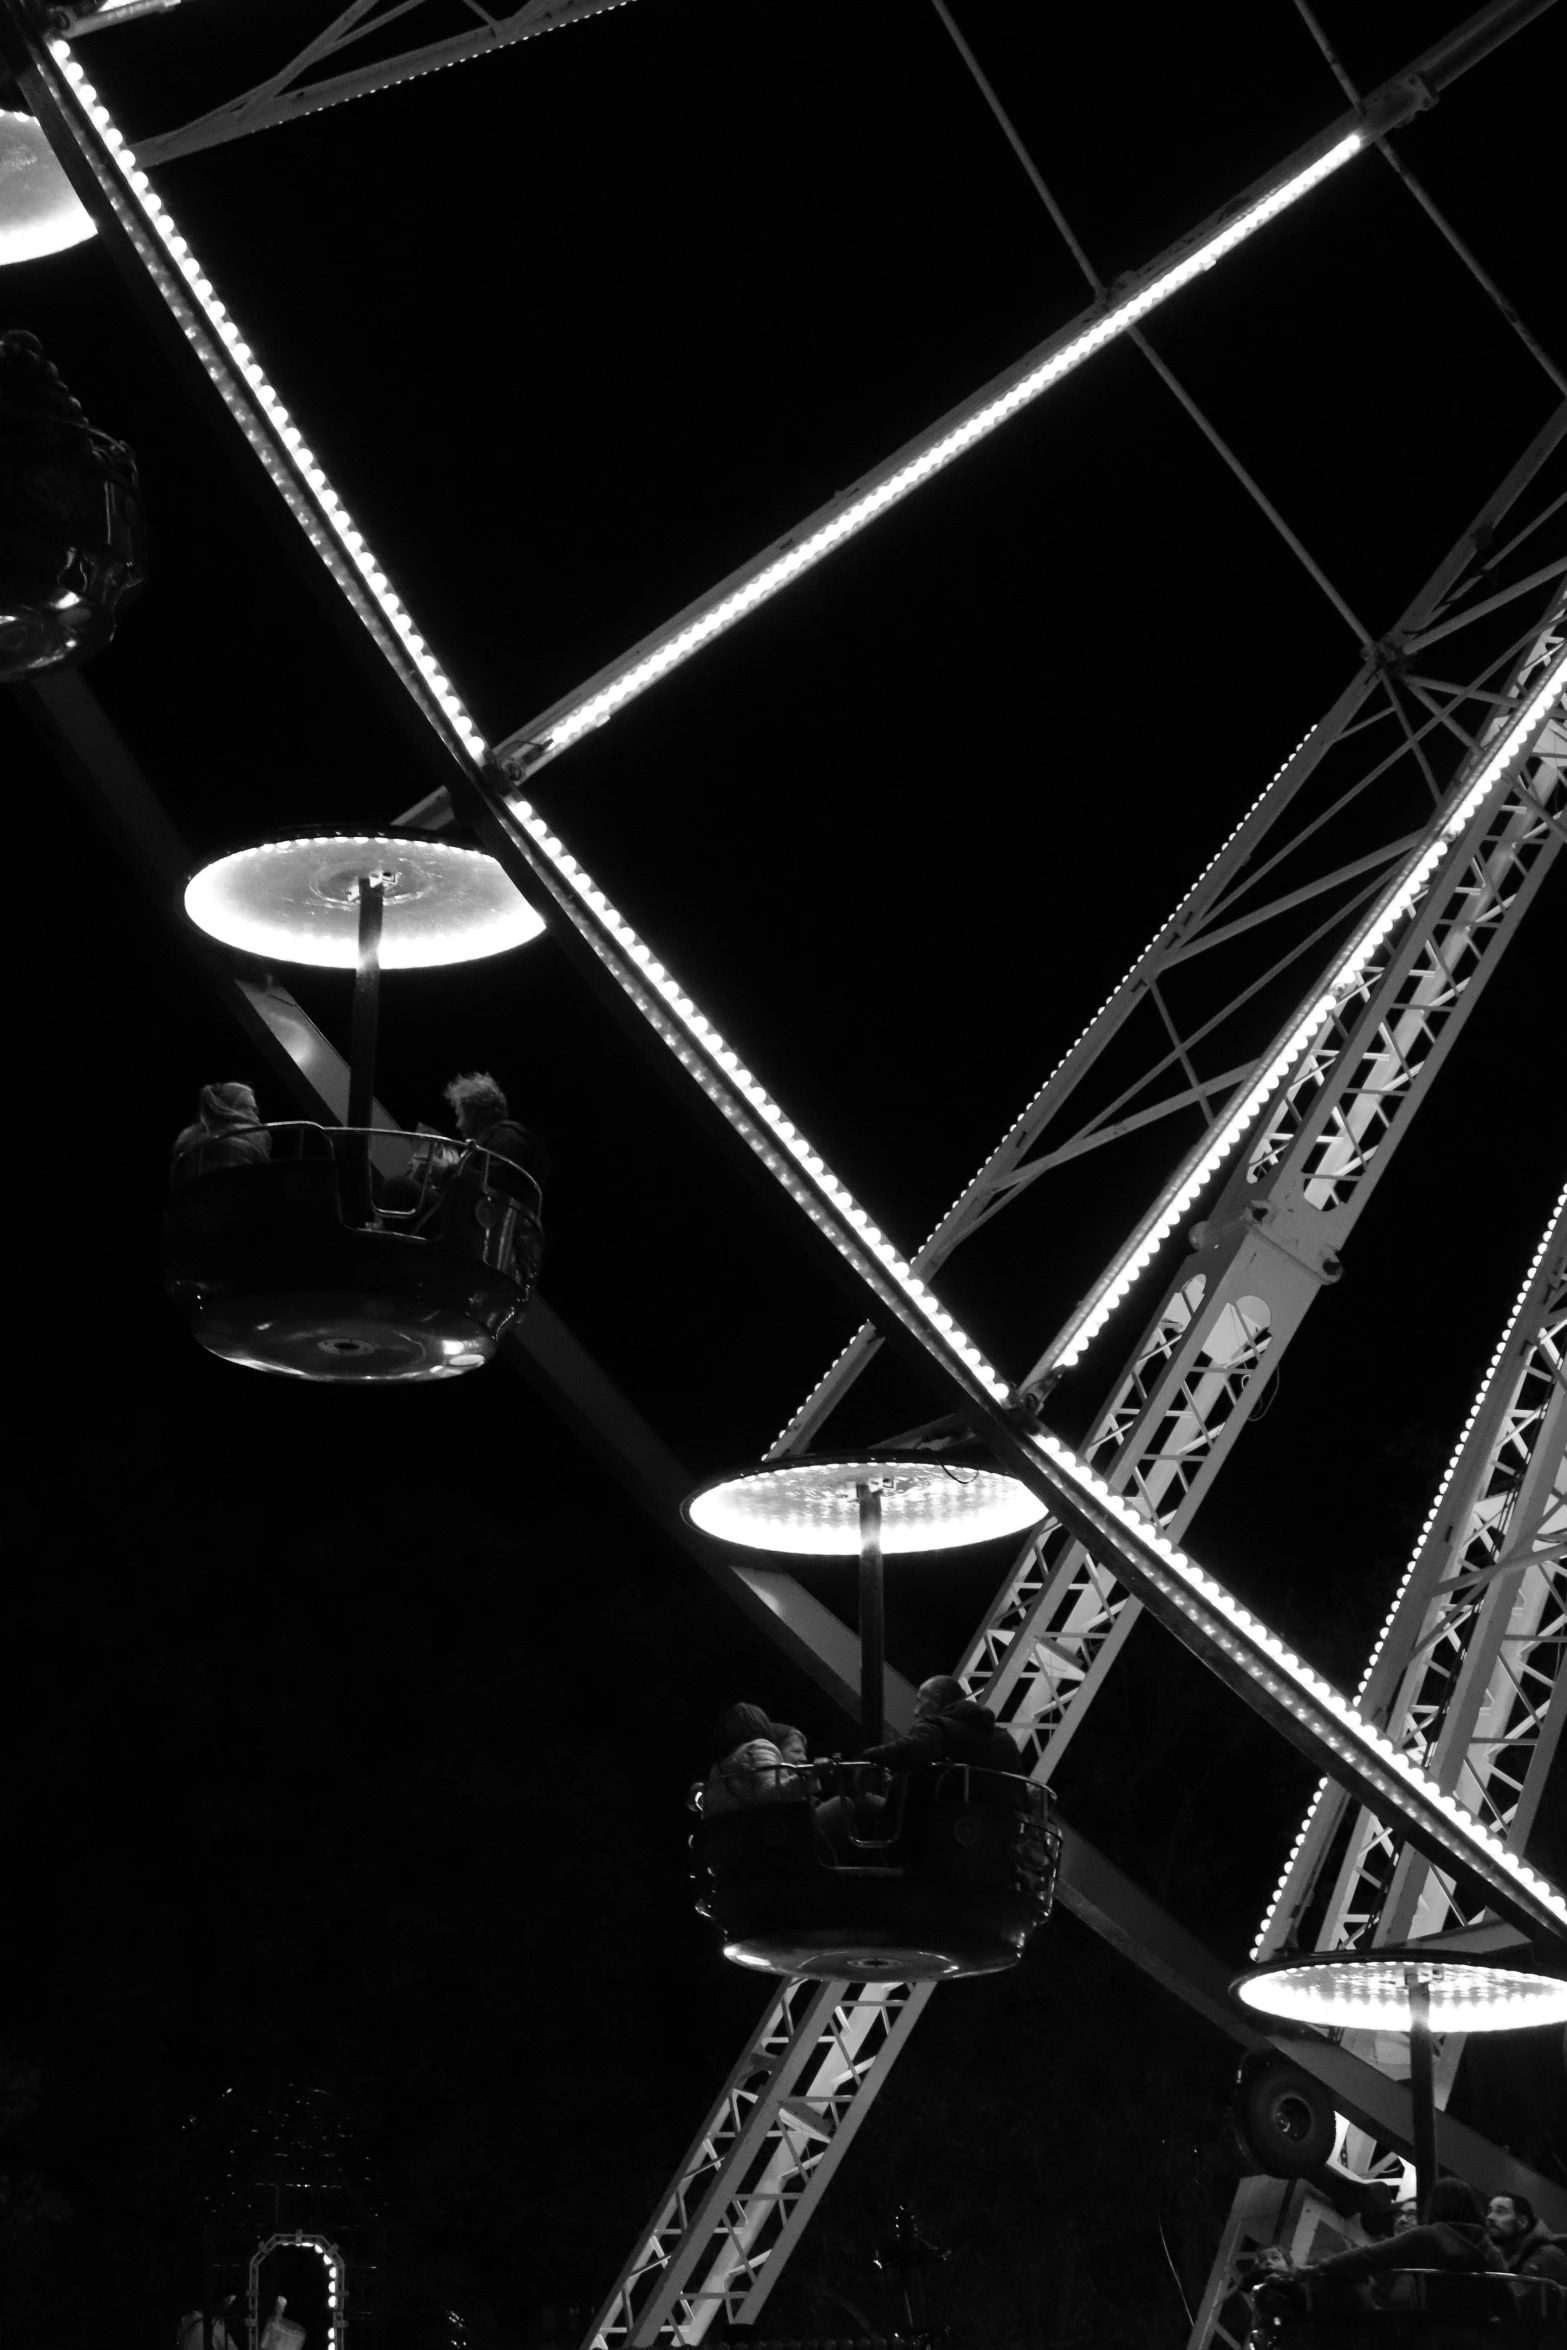 several chairs are illuminated by lights in a circus